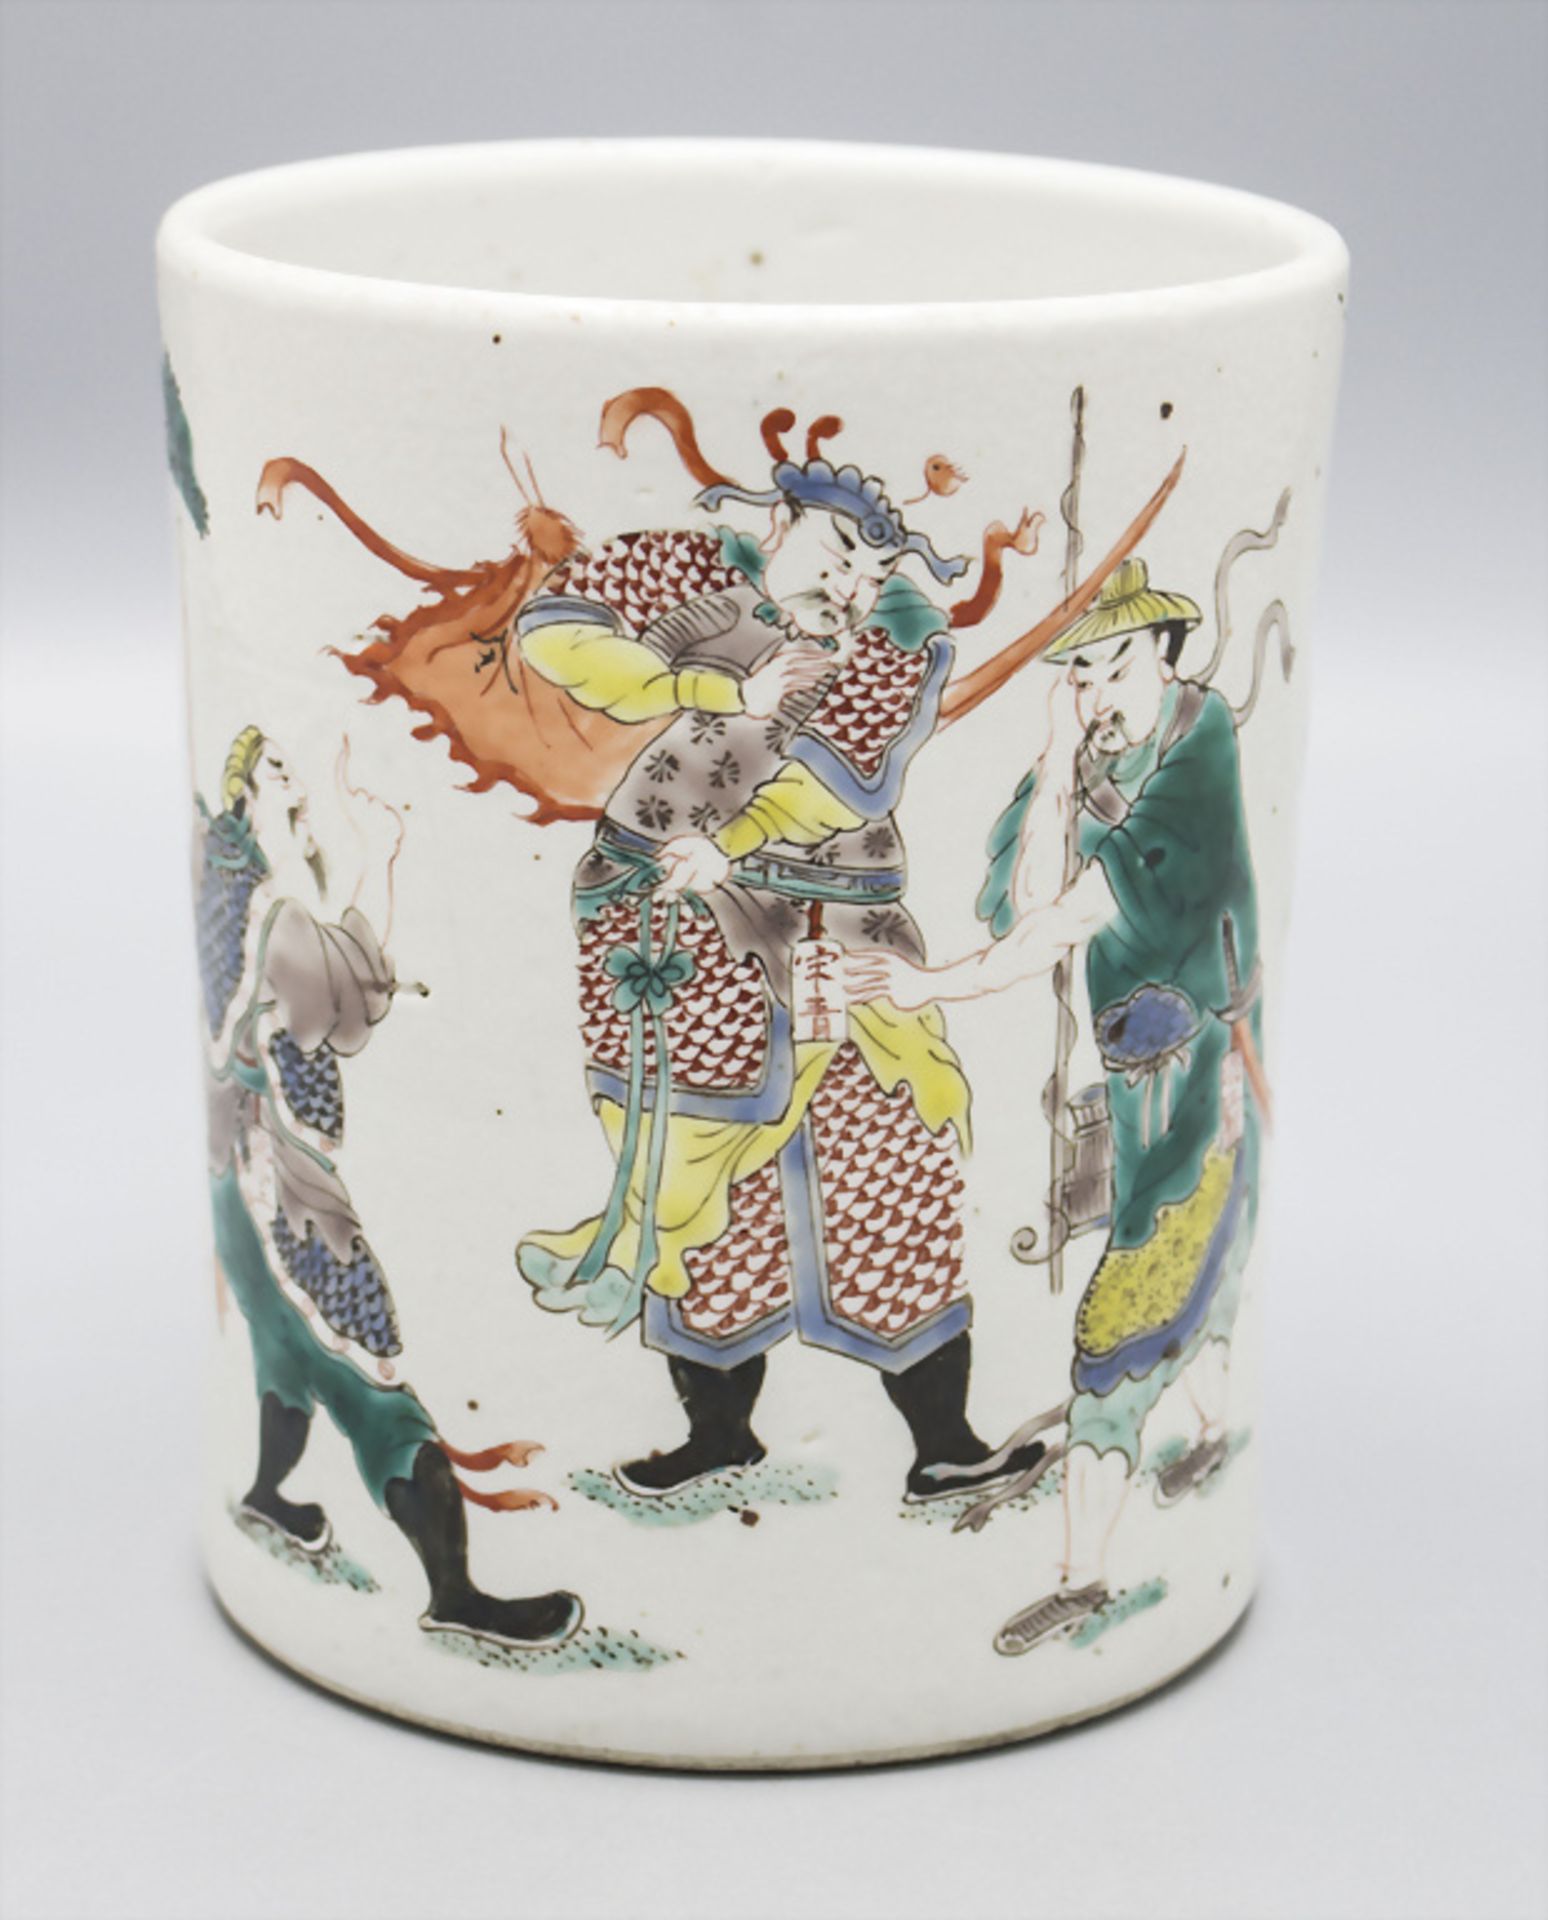 Pinselbecher / A porcelain brush cup, China, Qing Dynastie (1644-1911), wohl 18. Jh.